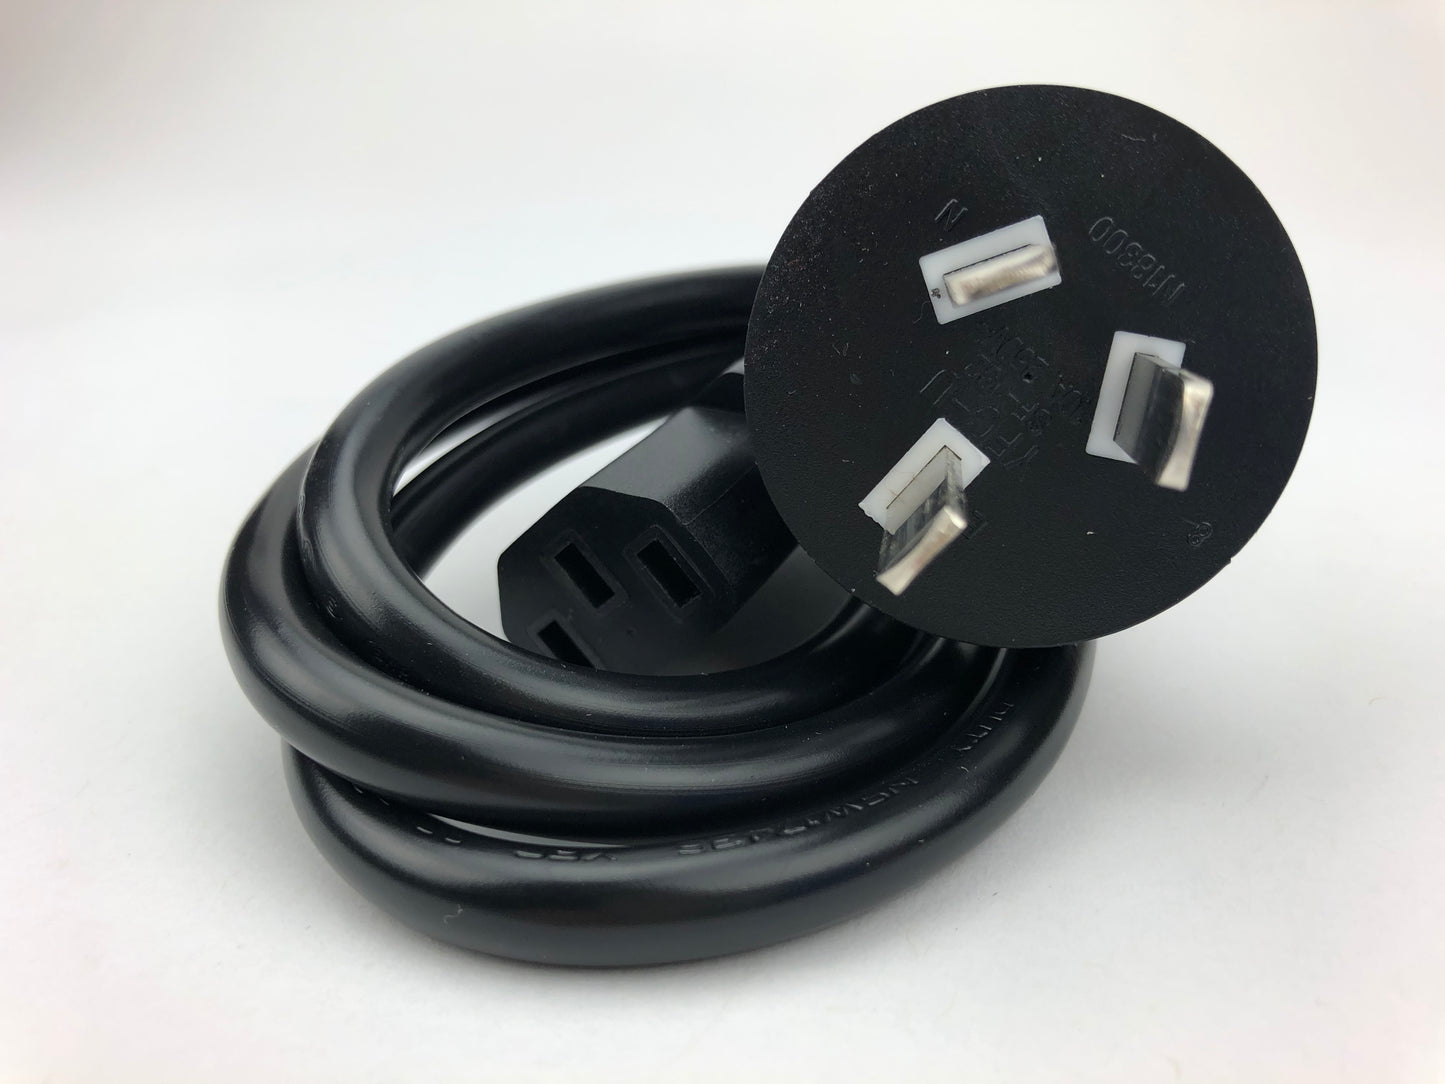 Replacement/International Power Cords